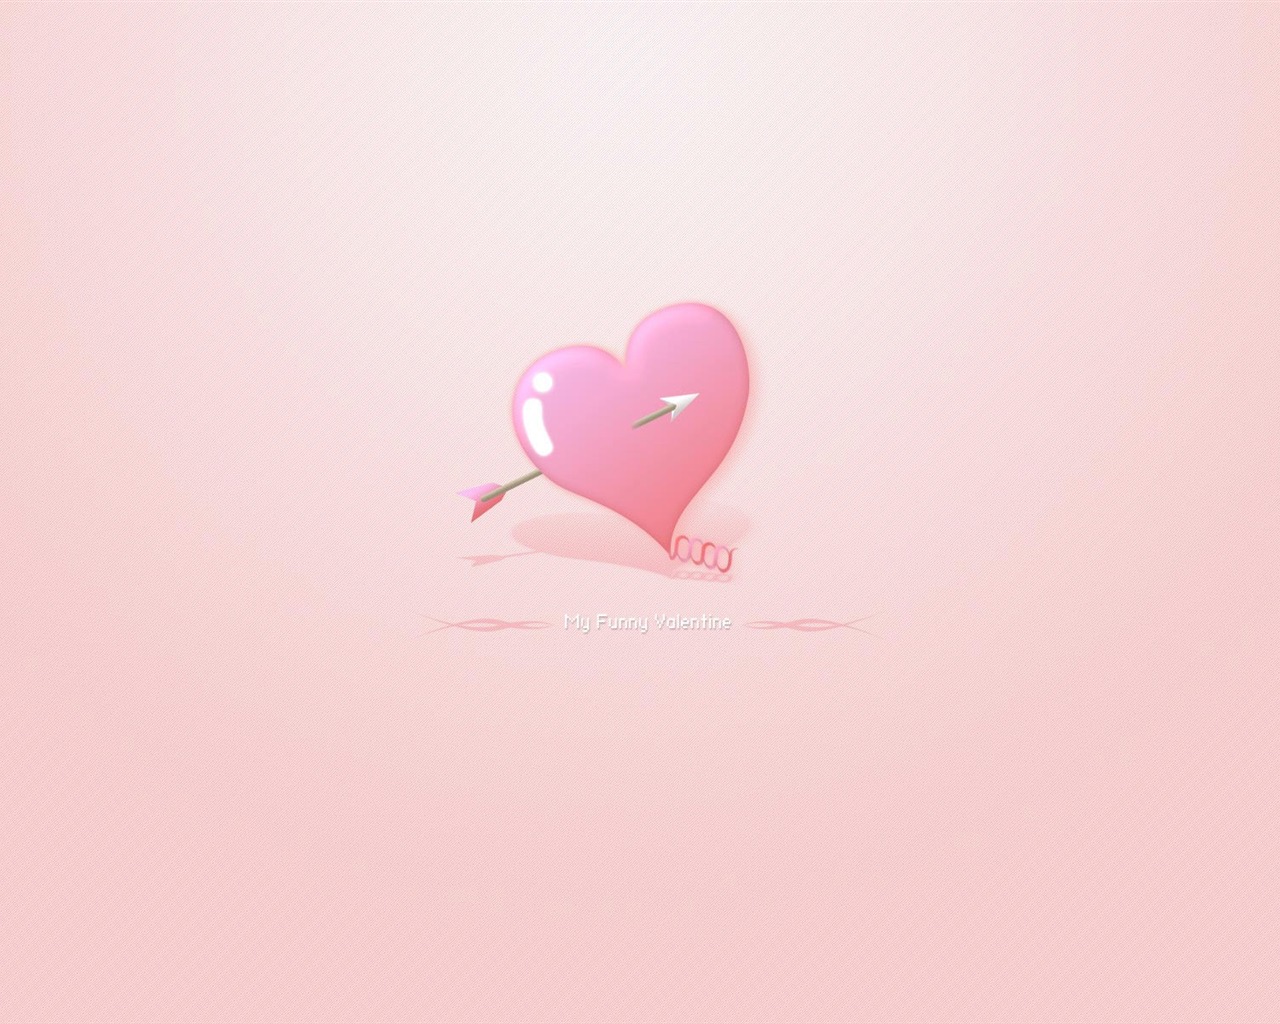 Valentine's Day Theme Wallpapers (3) #9 - 1280x1024